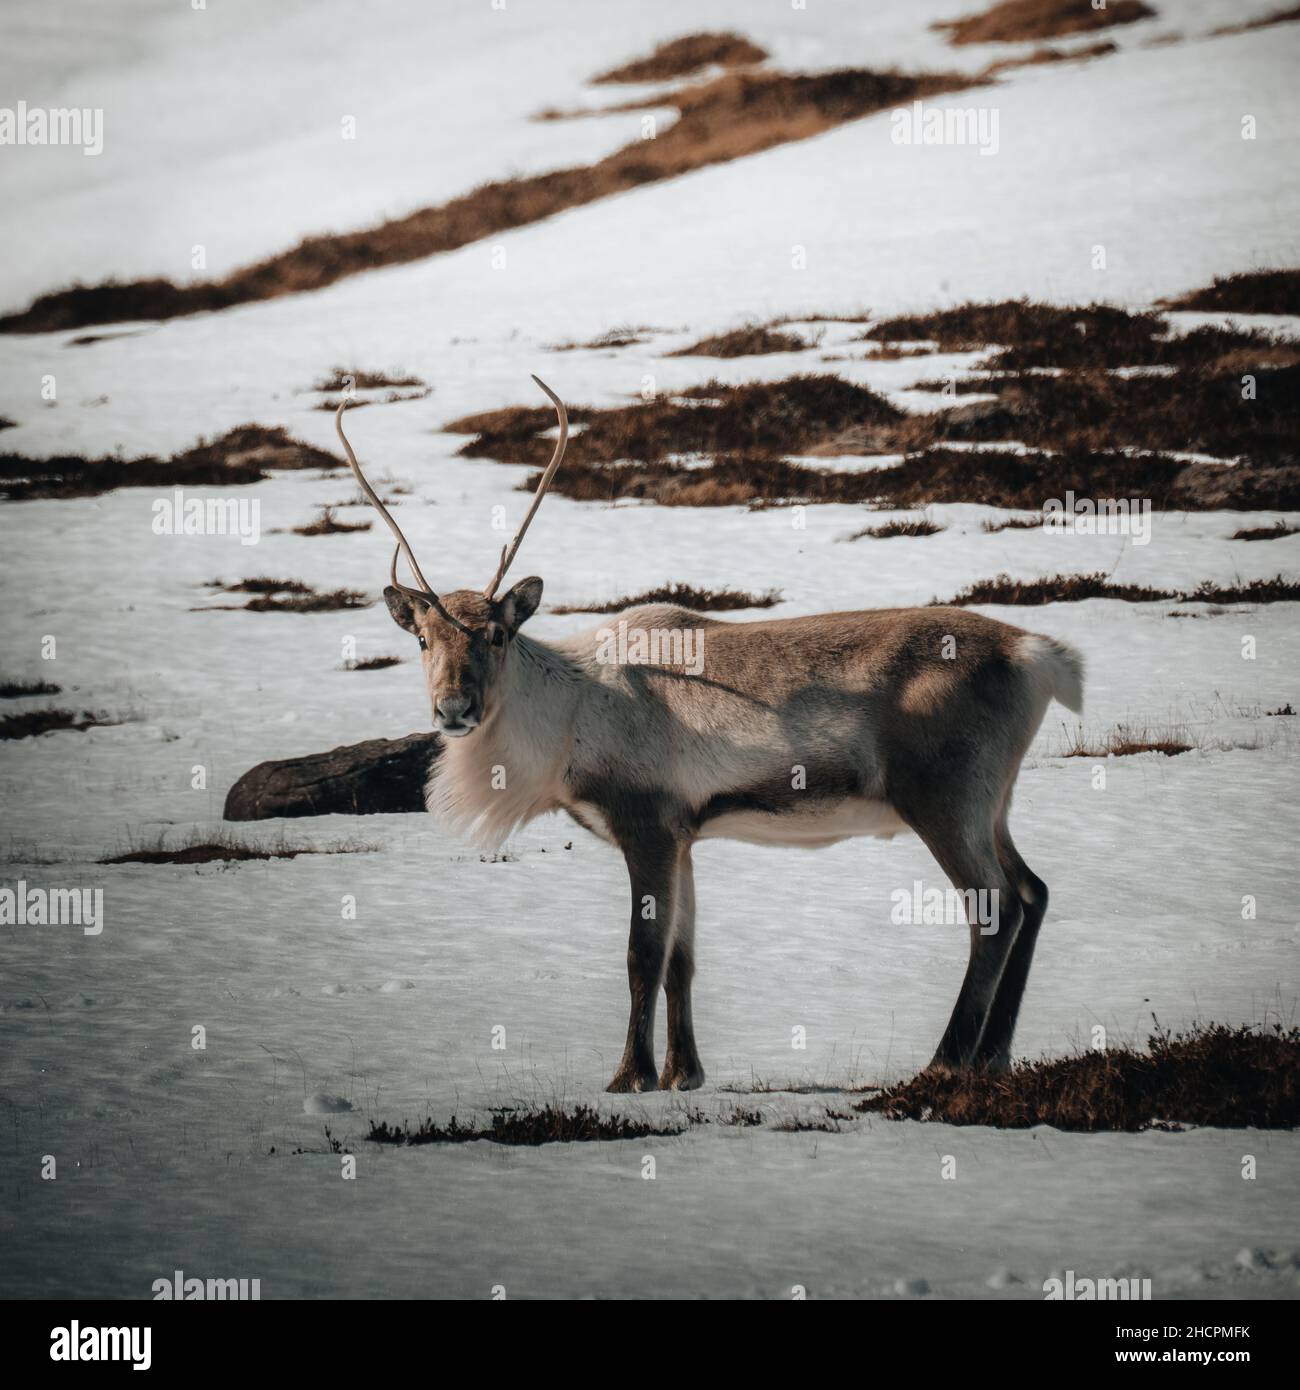 Lonely wild and calm reindeer in cold mountains in Iceland. Winter scenery with snow. Stock Photo